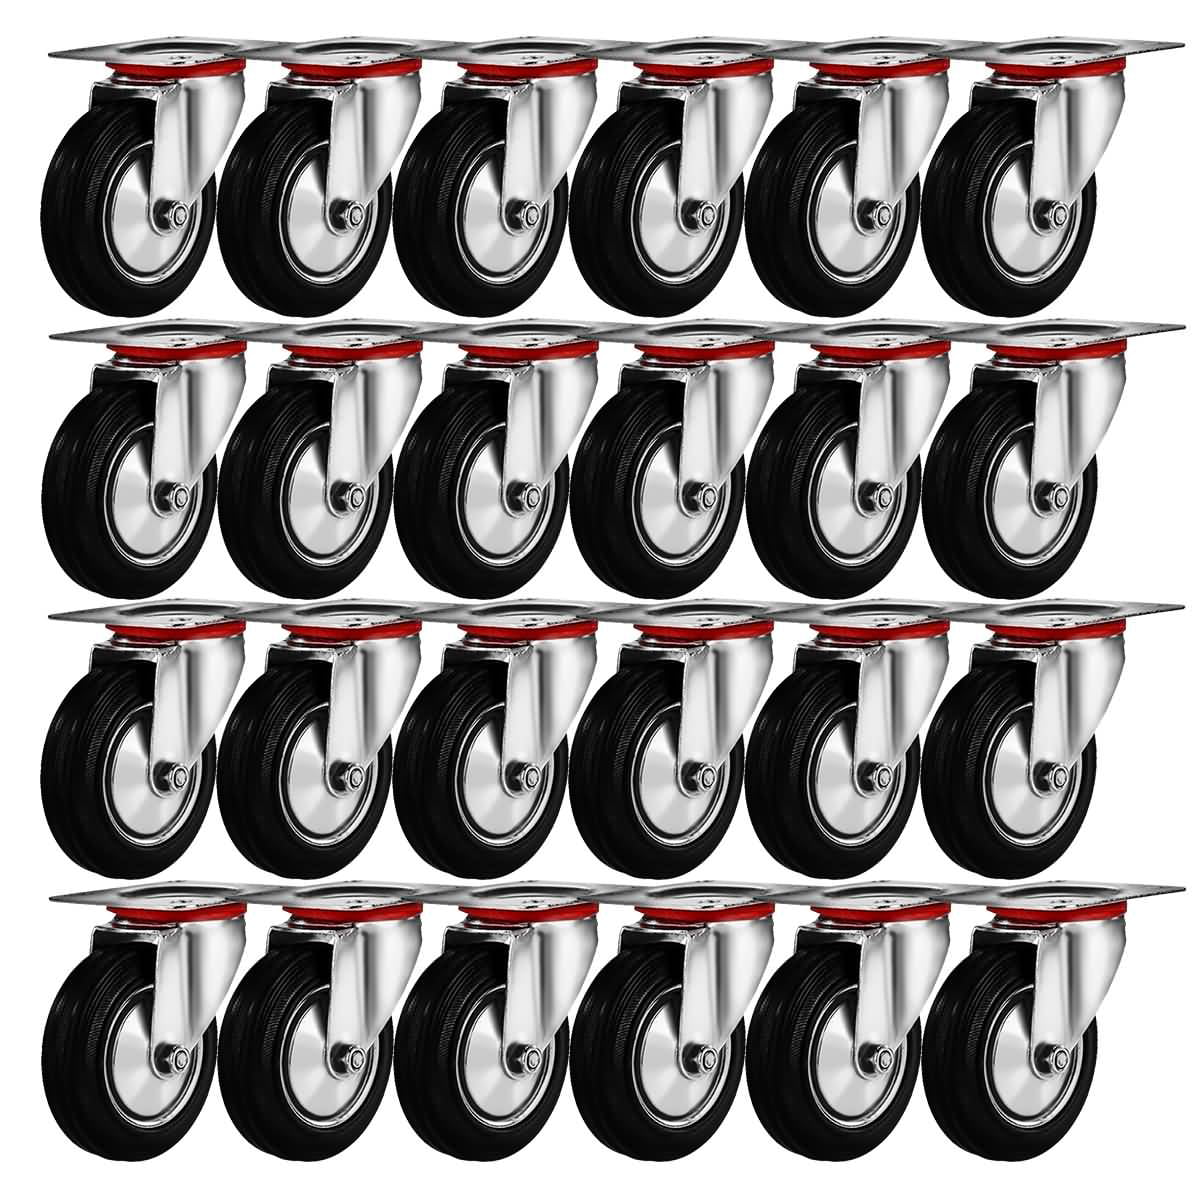 50 pack swivel caster wheels 3" rubber base with top plate & bearing heavy duty 